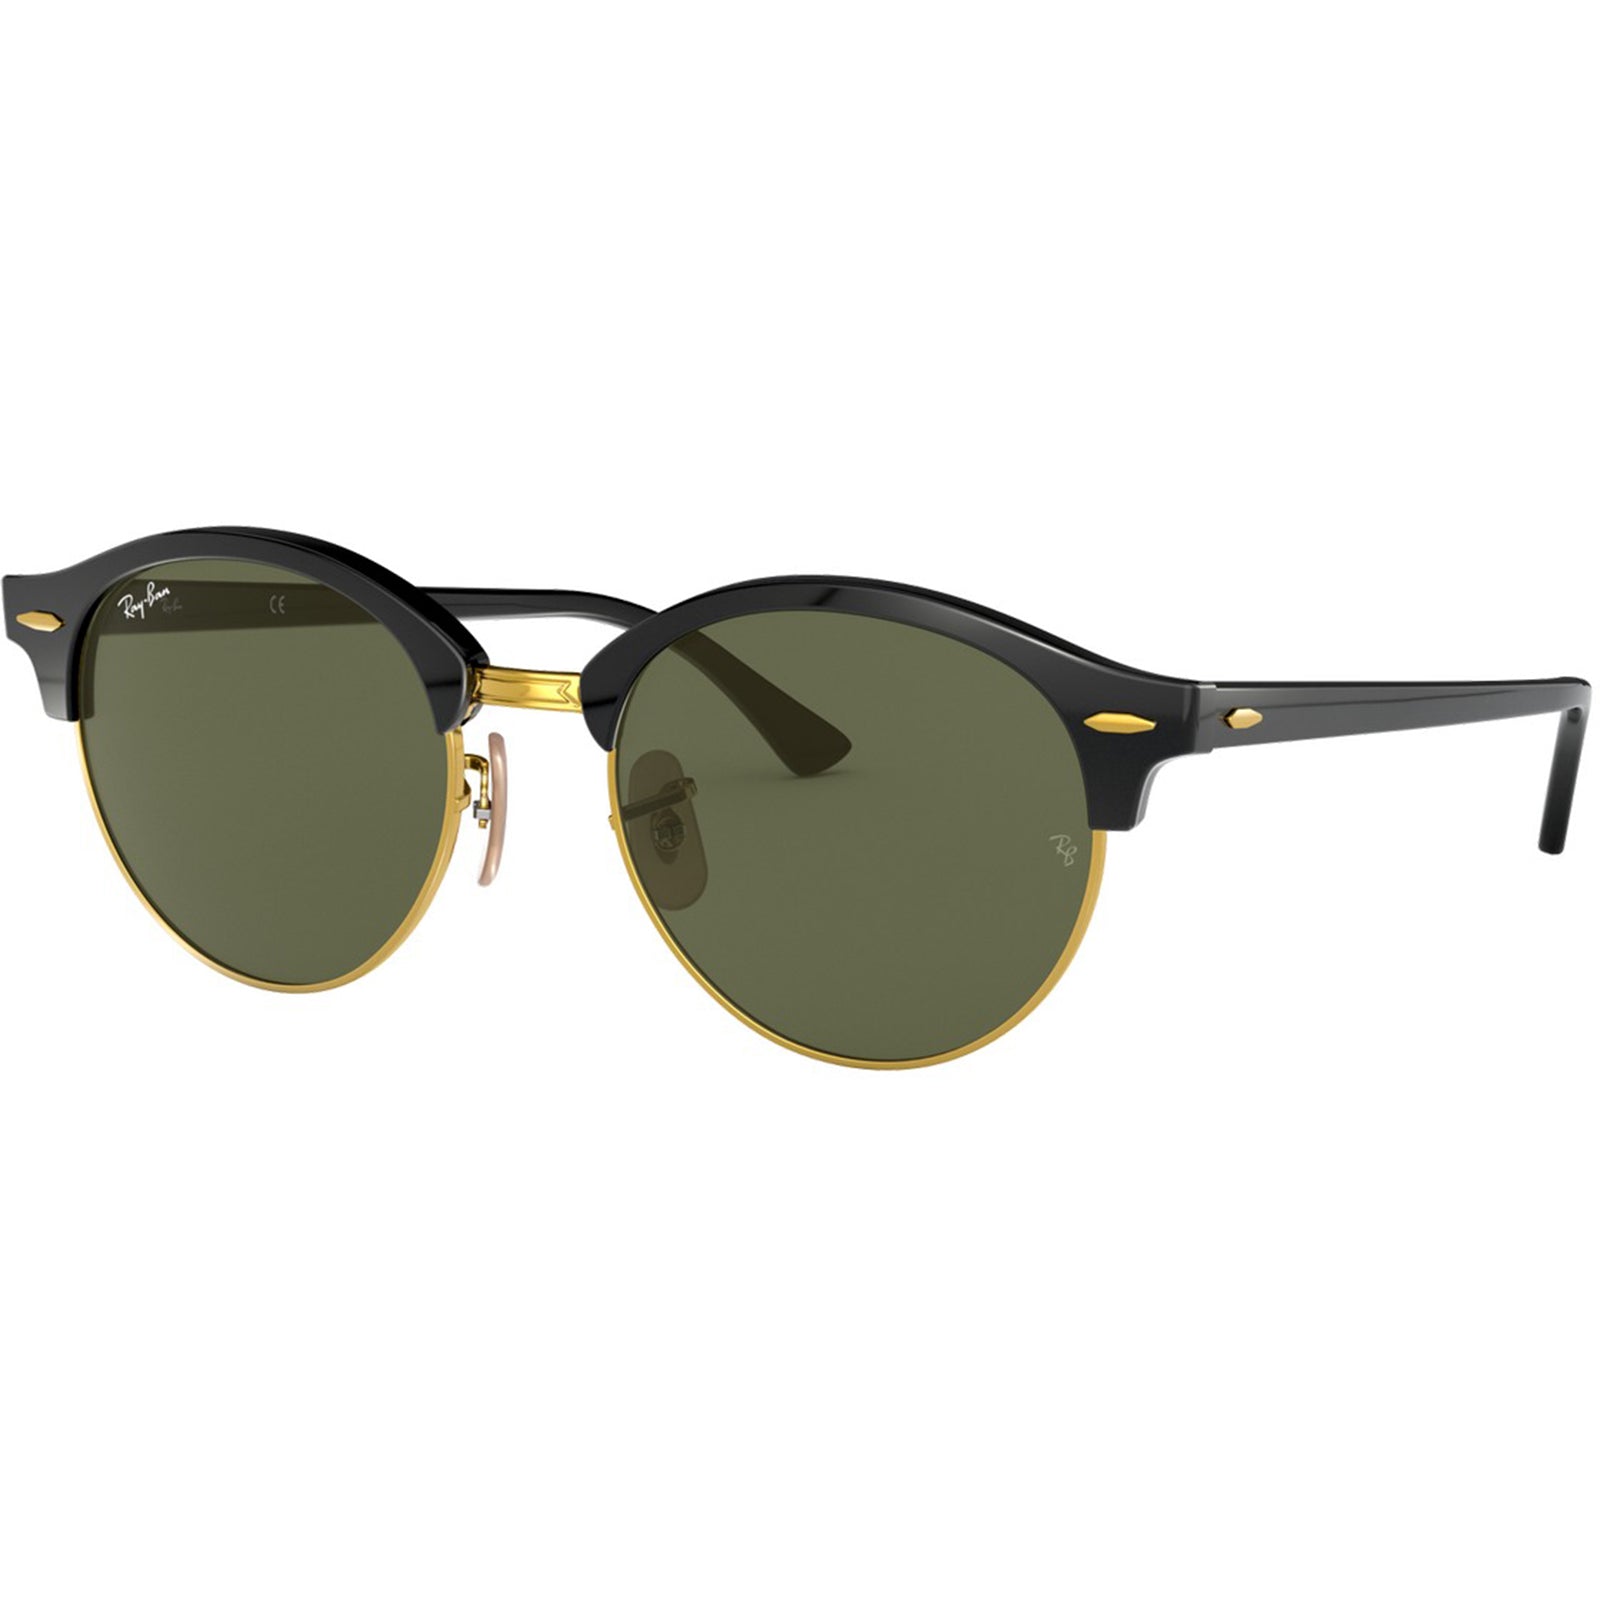 Ray-Ban Clubround Adult Lifestyle Sunglasses (Refurbished, Without Tags)